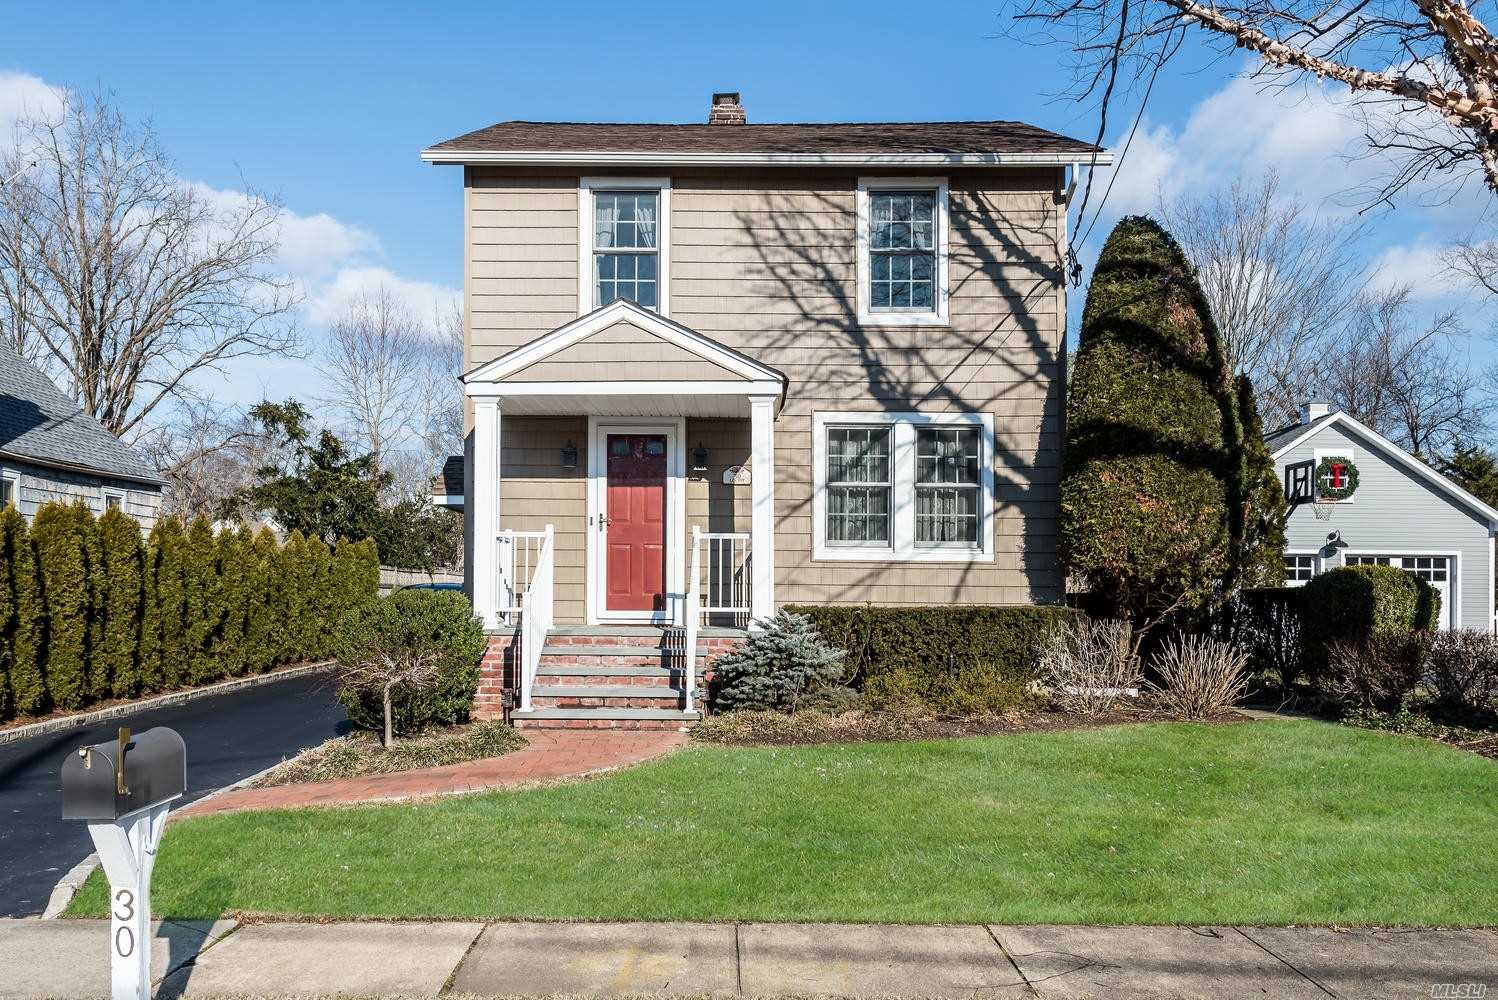 Updated And Impeccable 1924 Colonial. Cac, Generator, Newer Siding, All New Anderson Replacement Windows, Granite Eik, 10 Yr Roof., Walking Distance To Muttontown Preserve!!! Oversized Garage With Pull Down To Large Standup Storage Area. Open House Cancelled!!!!!!